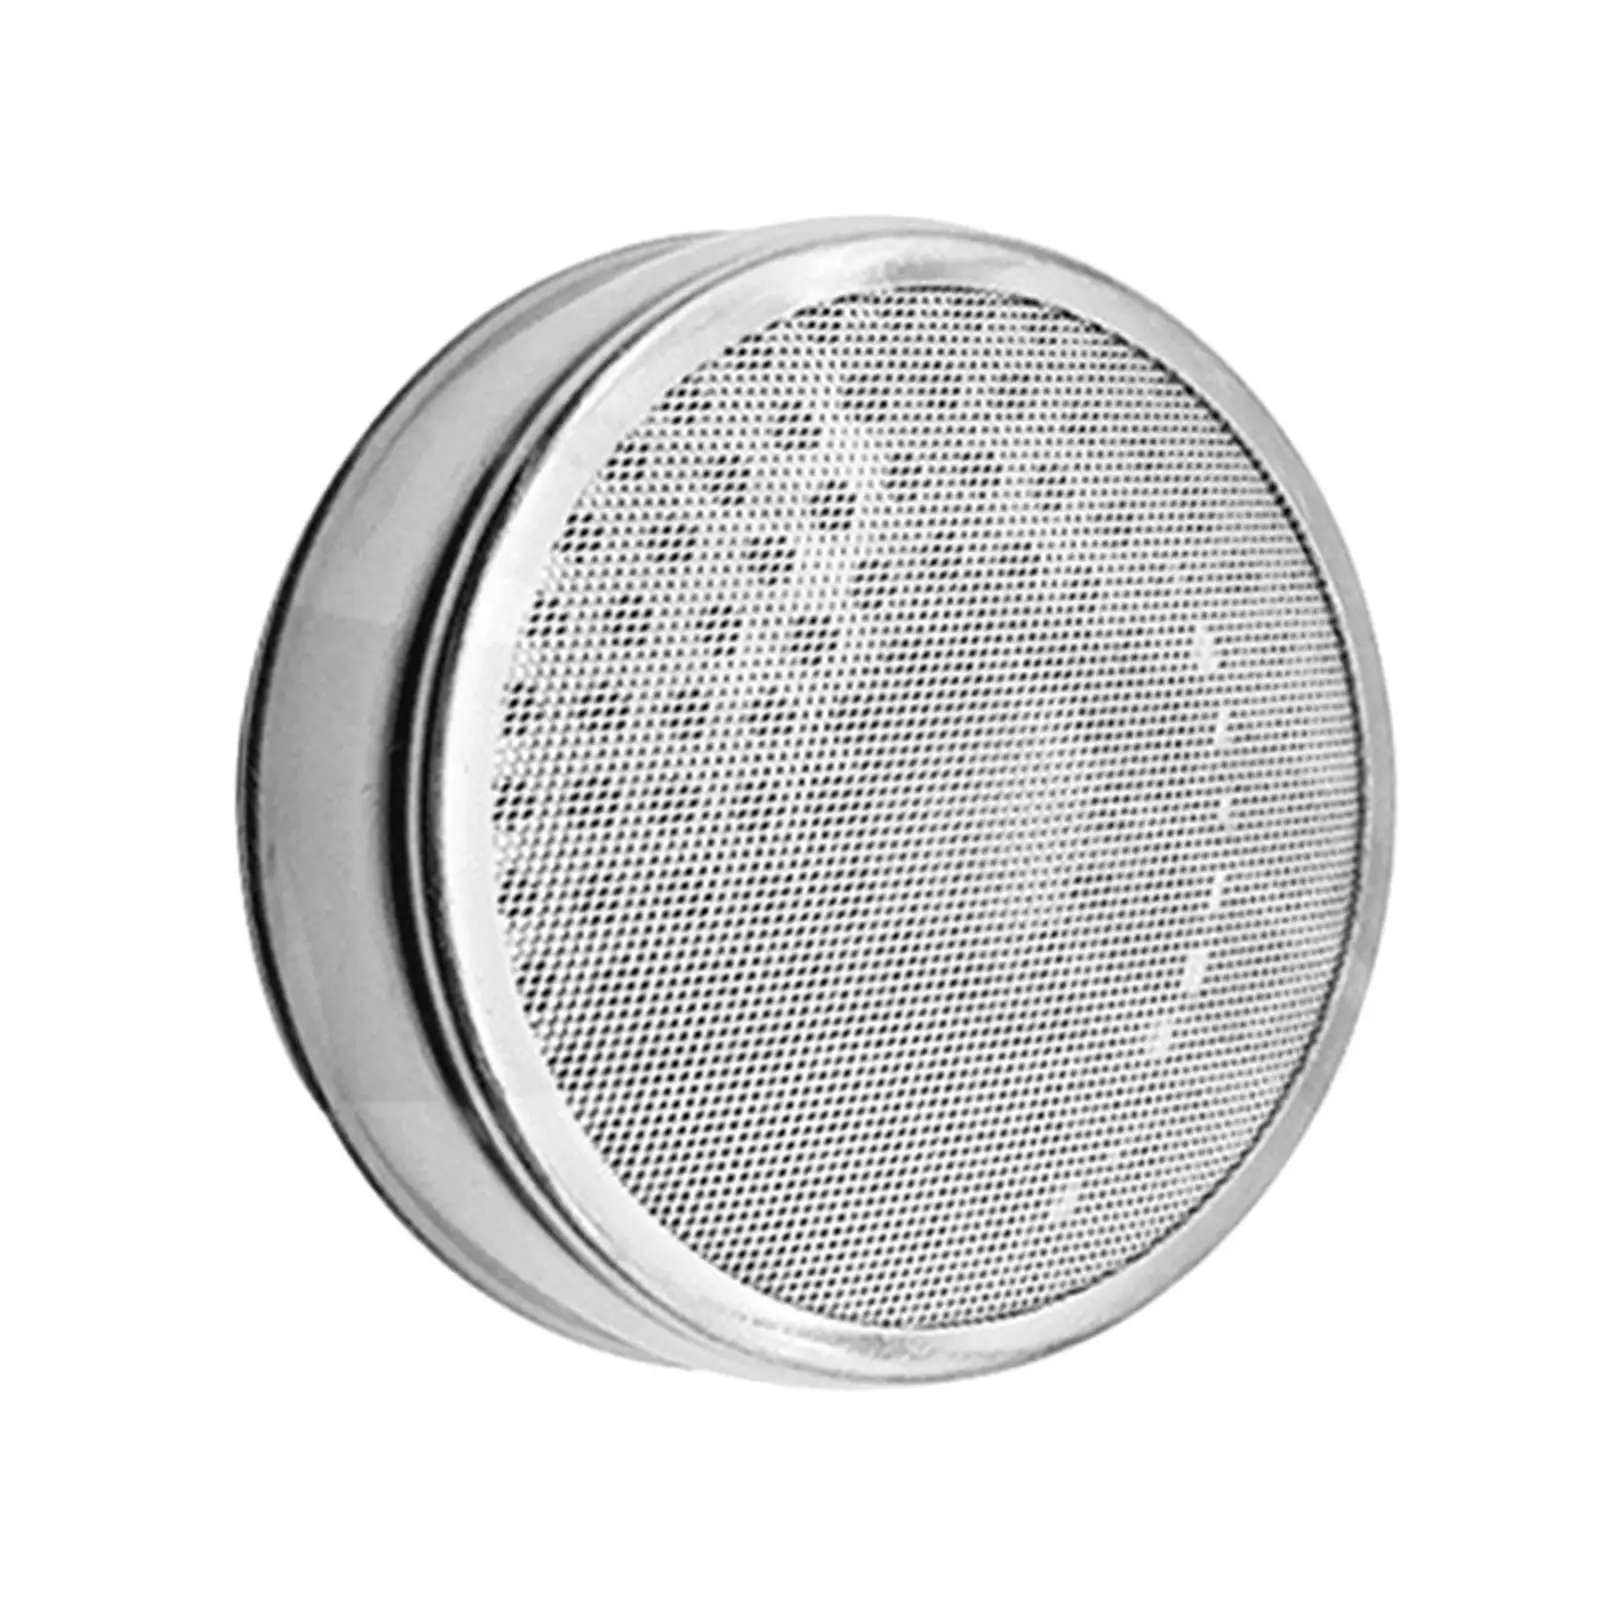 Stainless Steel Group Head Shower Screen Reusable for Coffee Maker Accessory